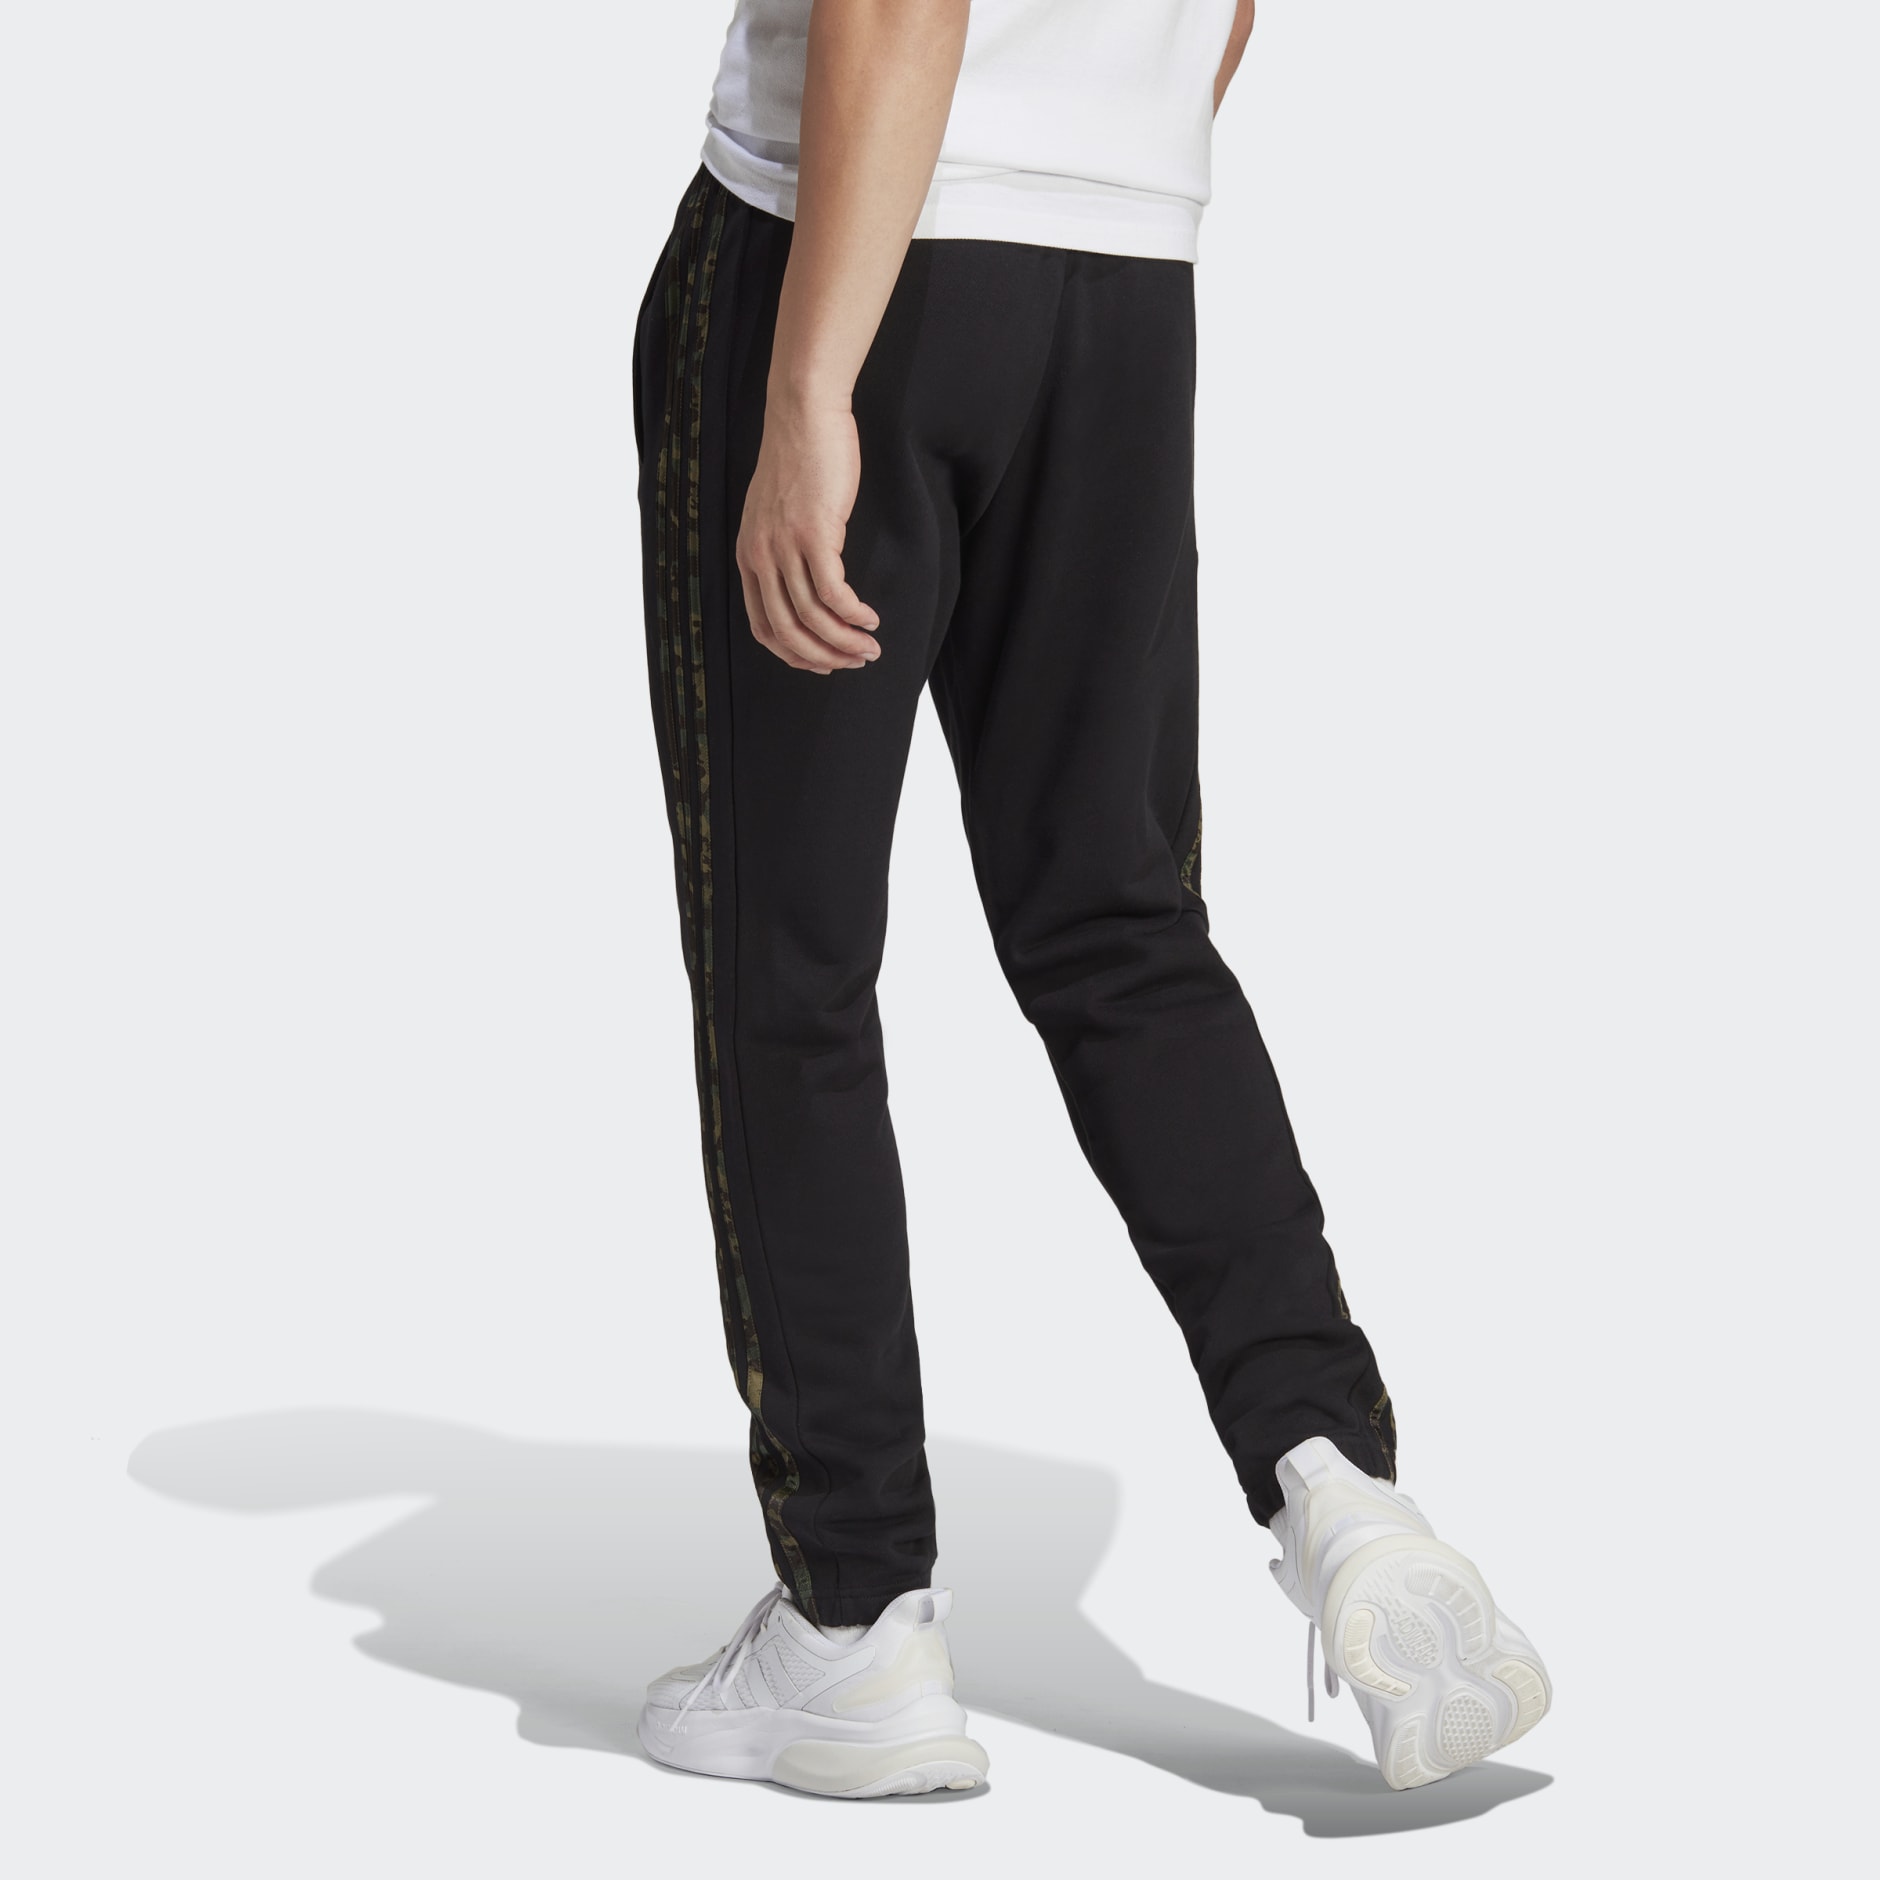 Elastic Cuff GH Black - Terry Essentials 3-Stripes adidas Tapered Pants adidas | French